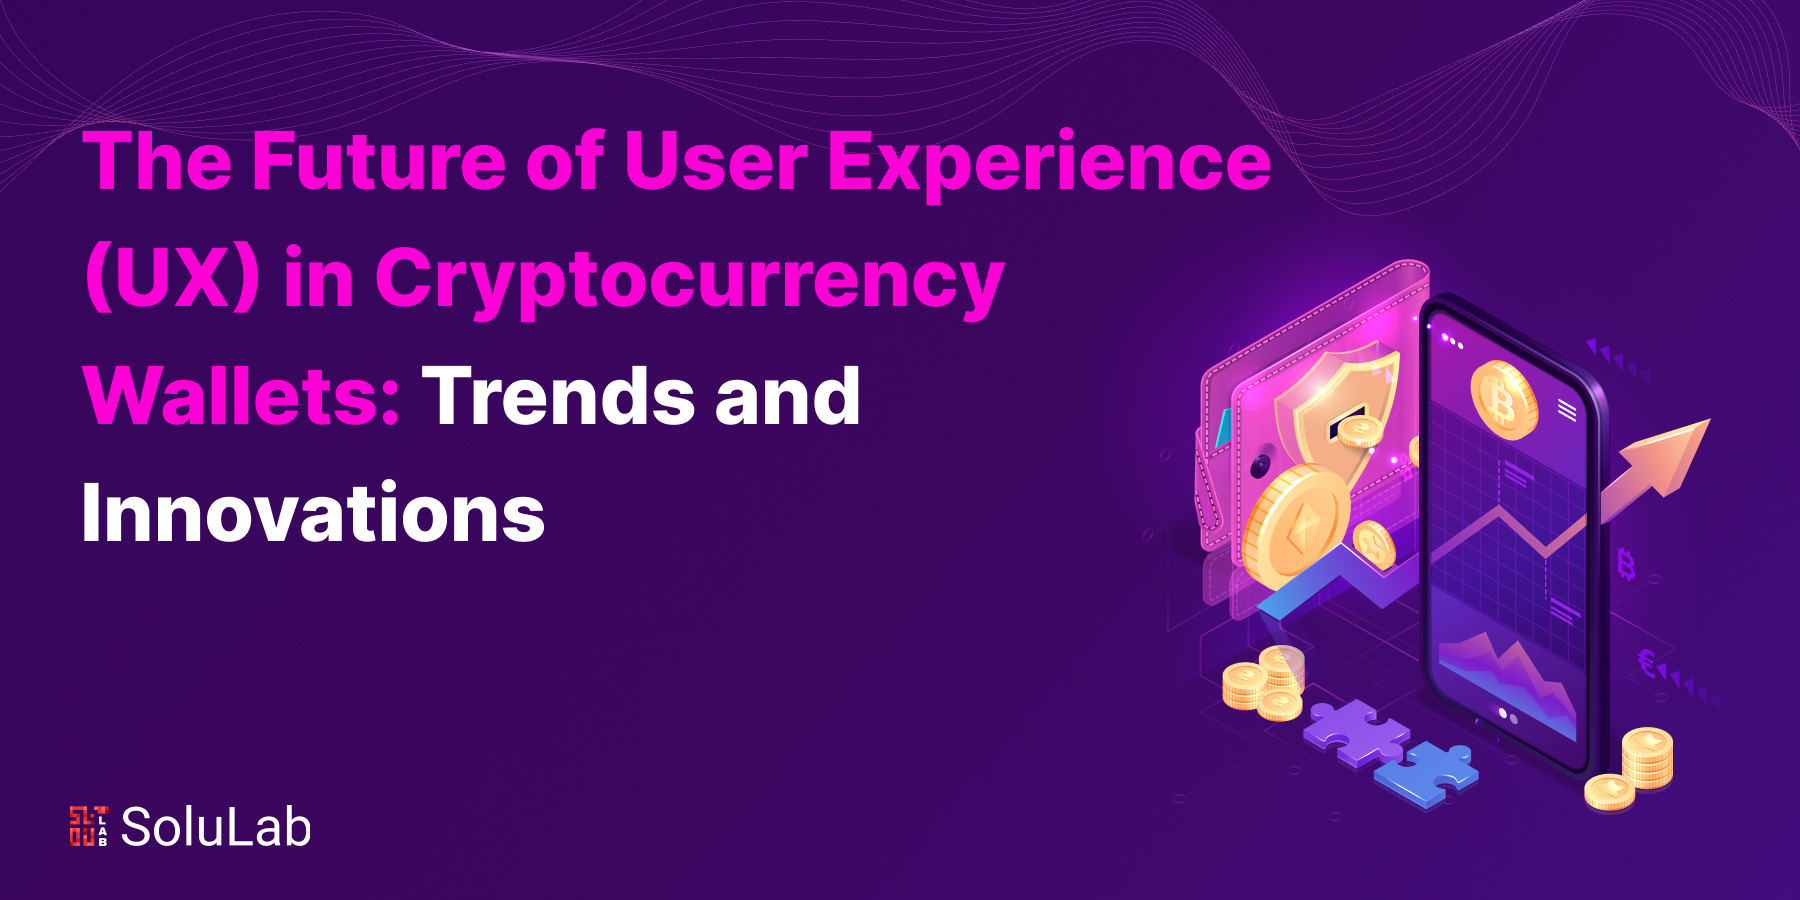 The Future of User Experience (UX) in Cryptocurrency Wallets: Trends and Innovations